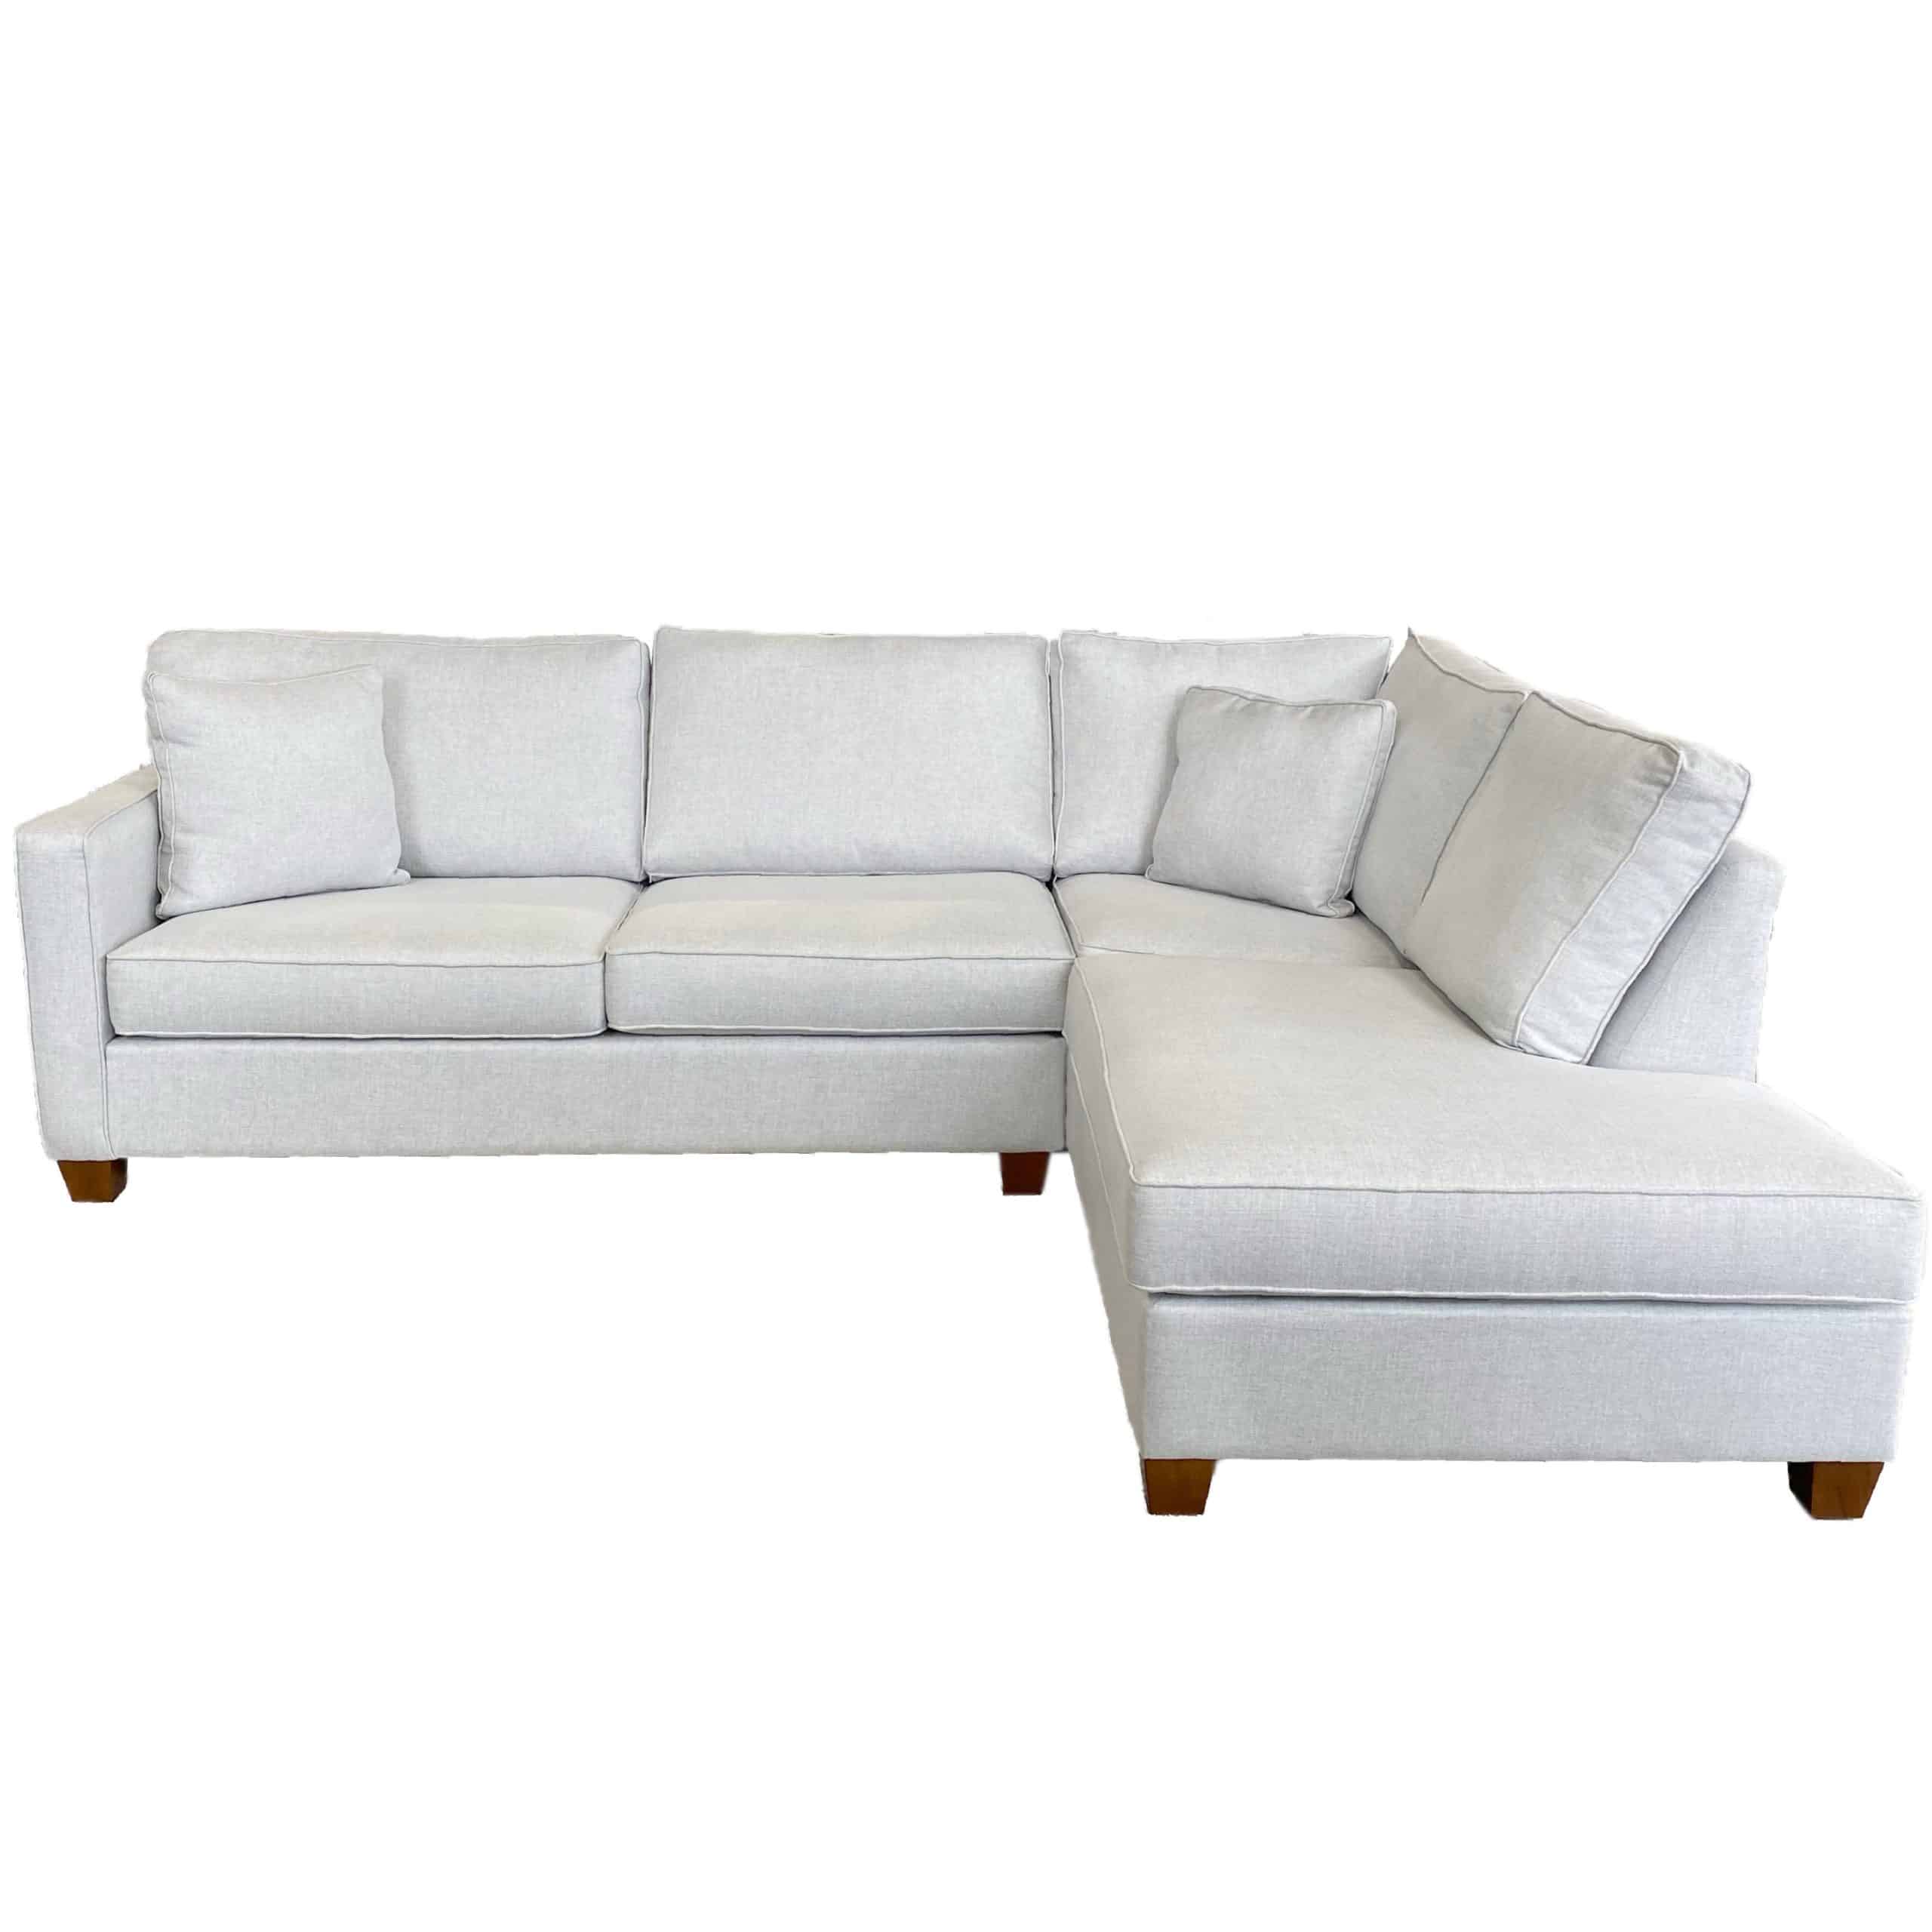 London Canadian Made Sectional - QuickShip